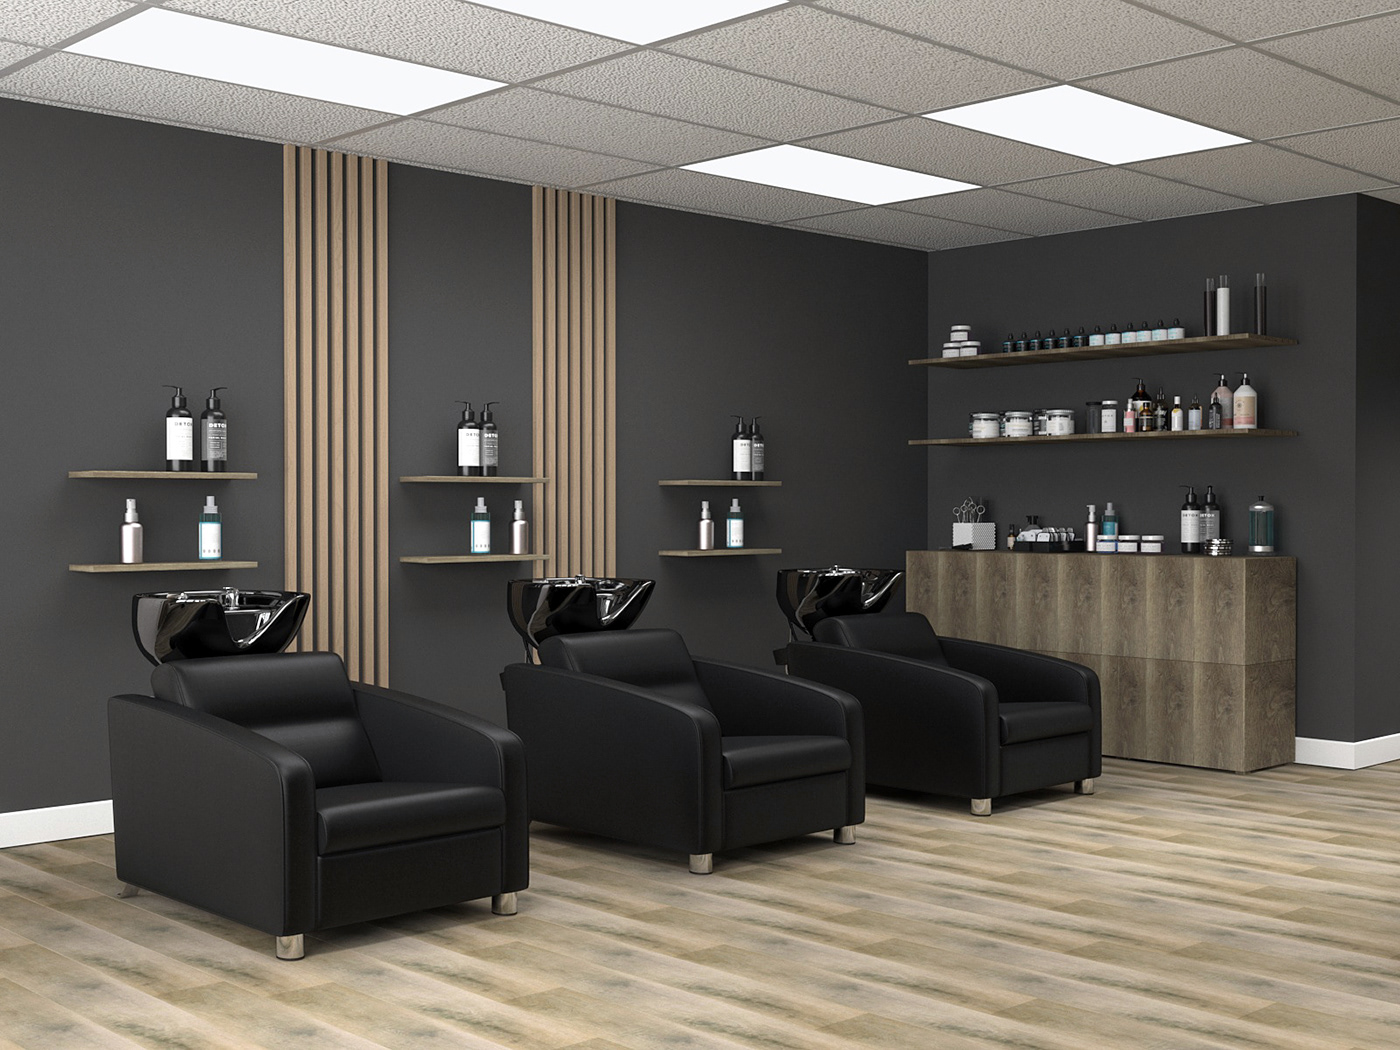 3ds max beauty beauty salon commercial design hairdressing area interior design  photoshop Render visualization vray